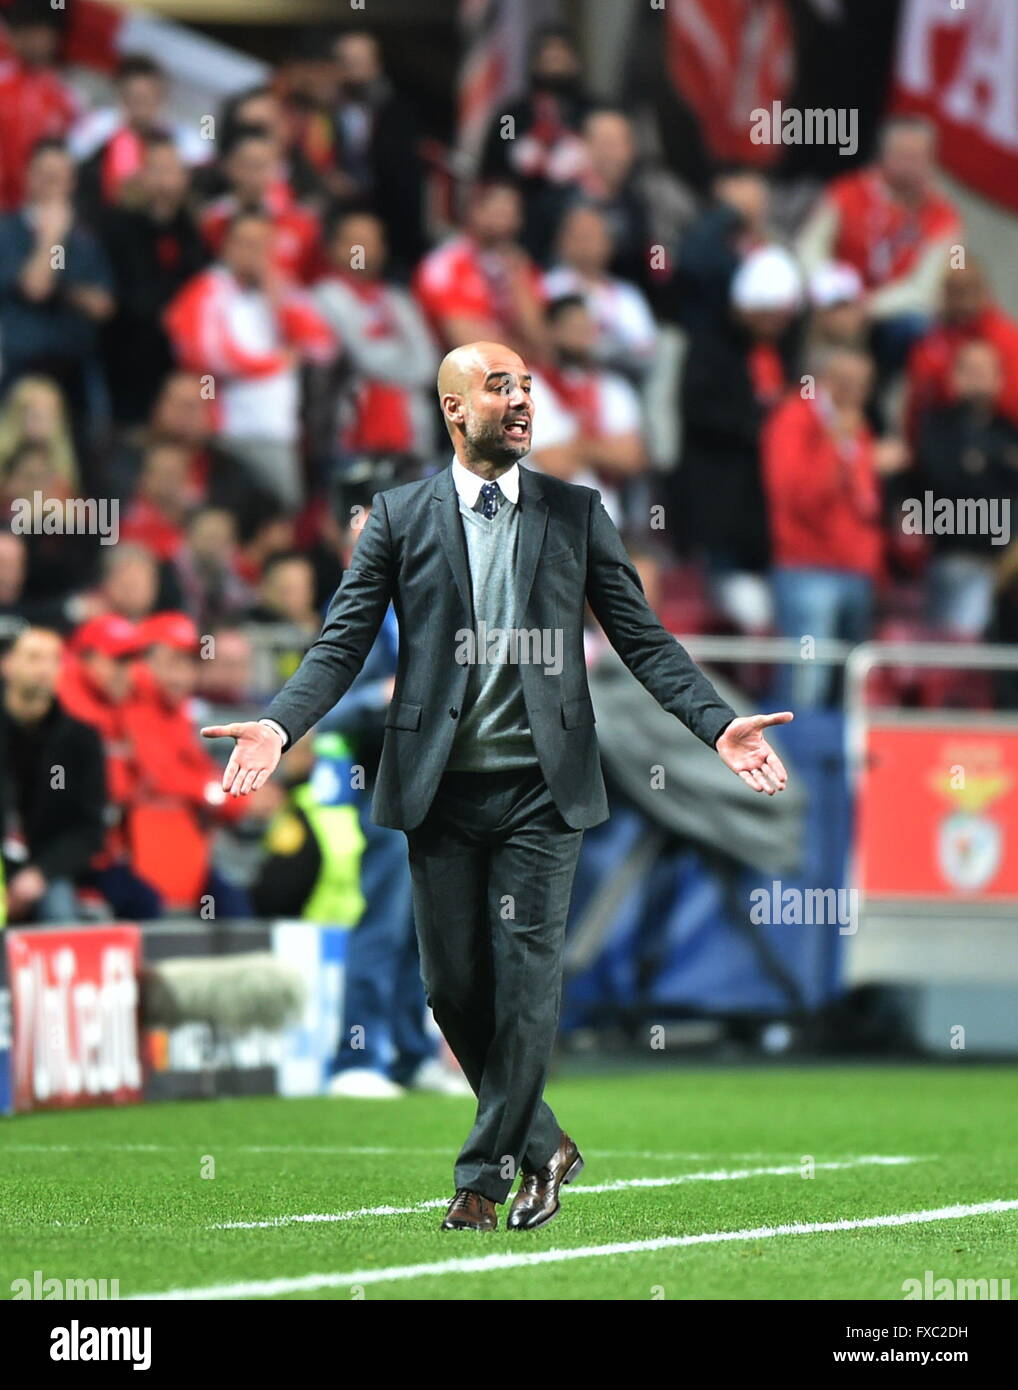 Lisbon. 13th Apr, 2016. Bayern's coach Josep Guardiola reacts during the second leg of quarterfinals of the Eurpean Champions League soccer match against SL Benfica at the Luz stadium in Lisbon on April 13, 2016. © Zhang Liyun/Xinhua/Alamy Live News Stock Photo